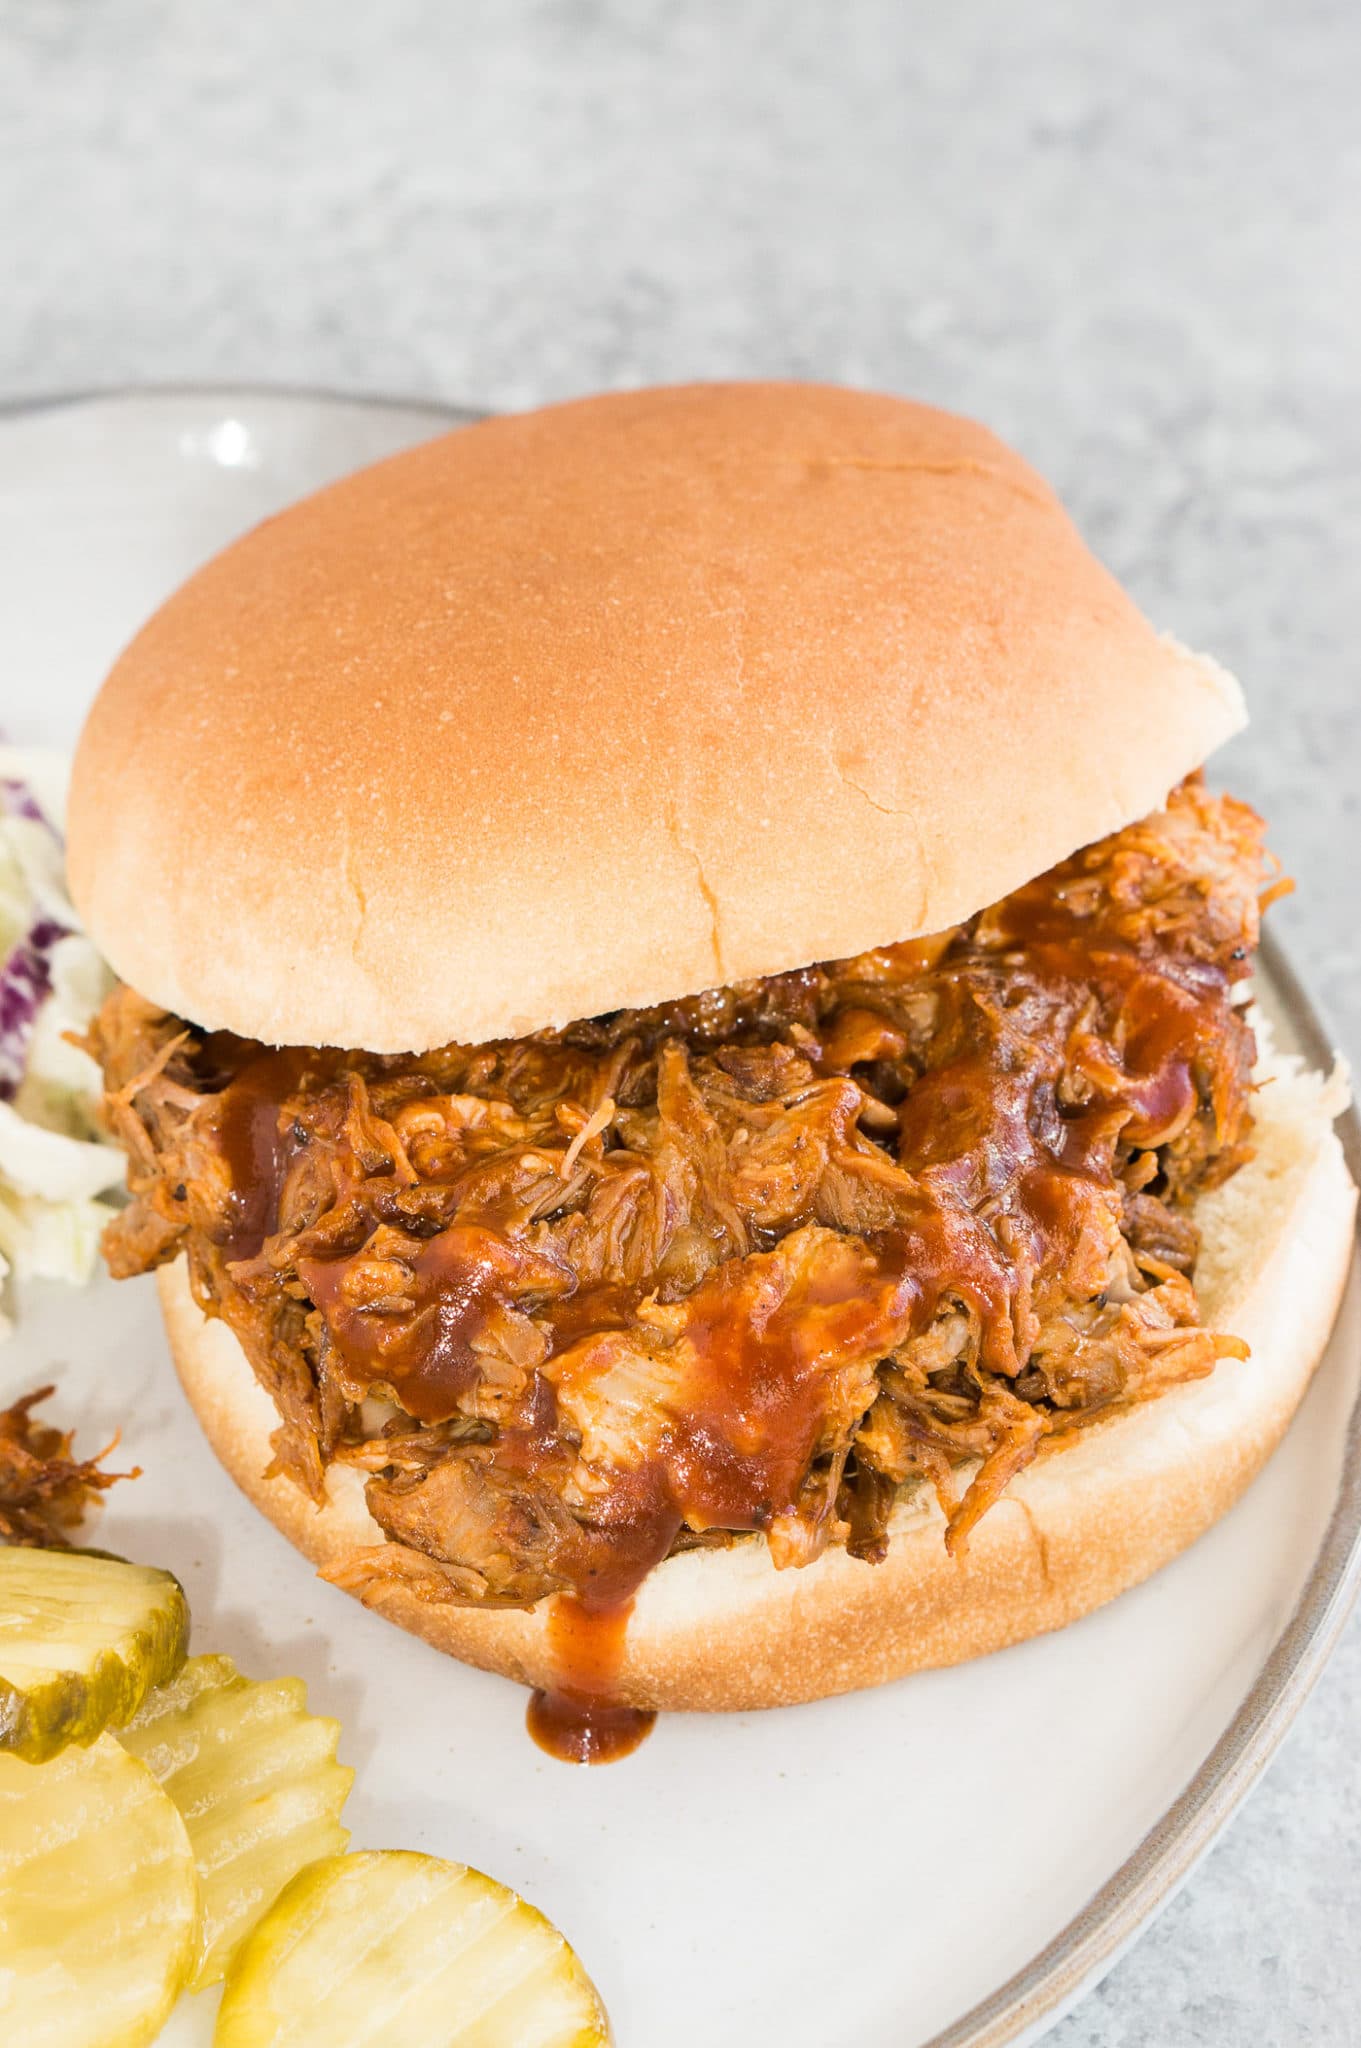 homemade pulled pork made in the instant pot and served on a bun